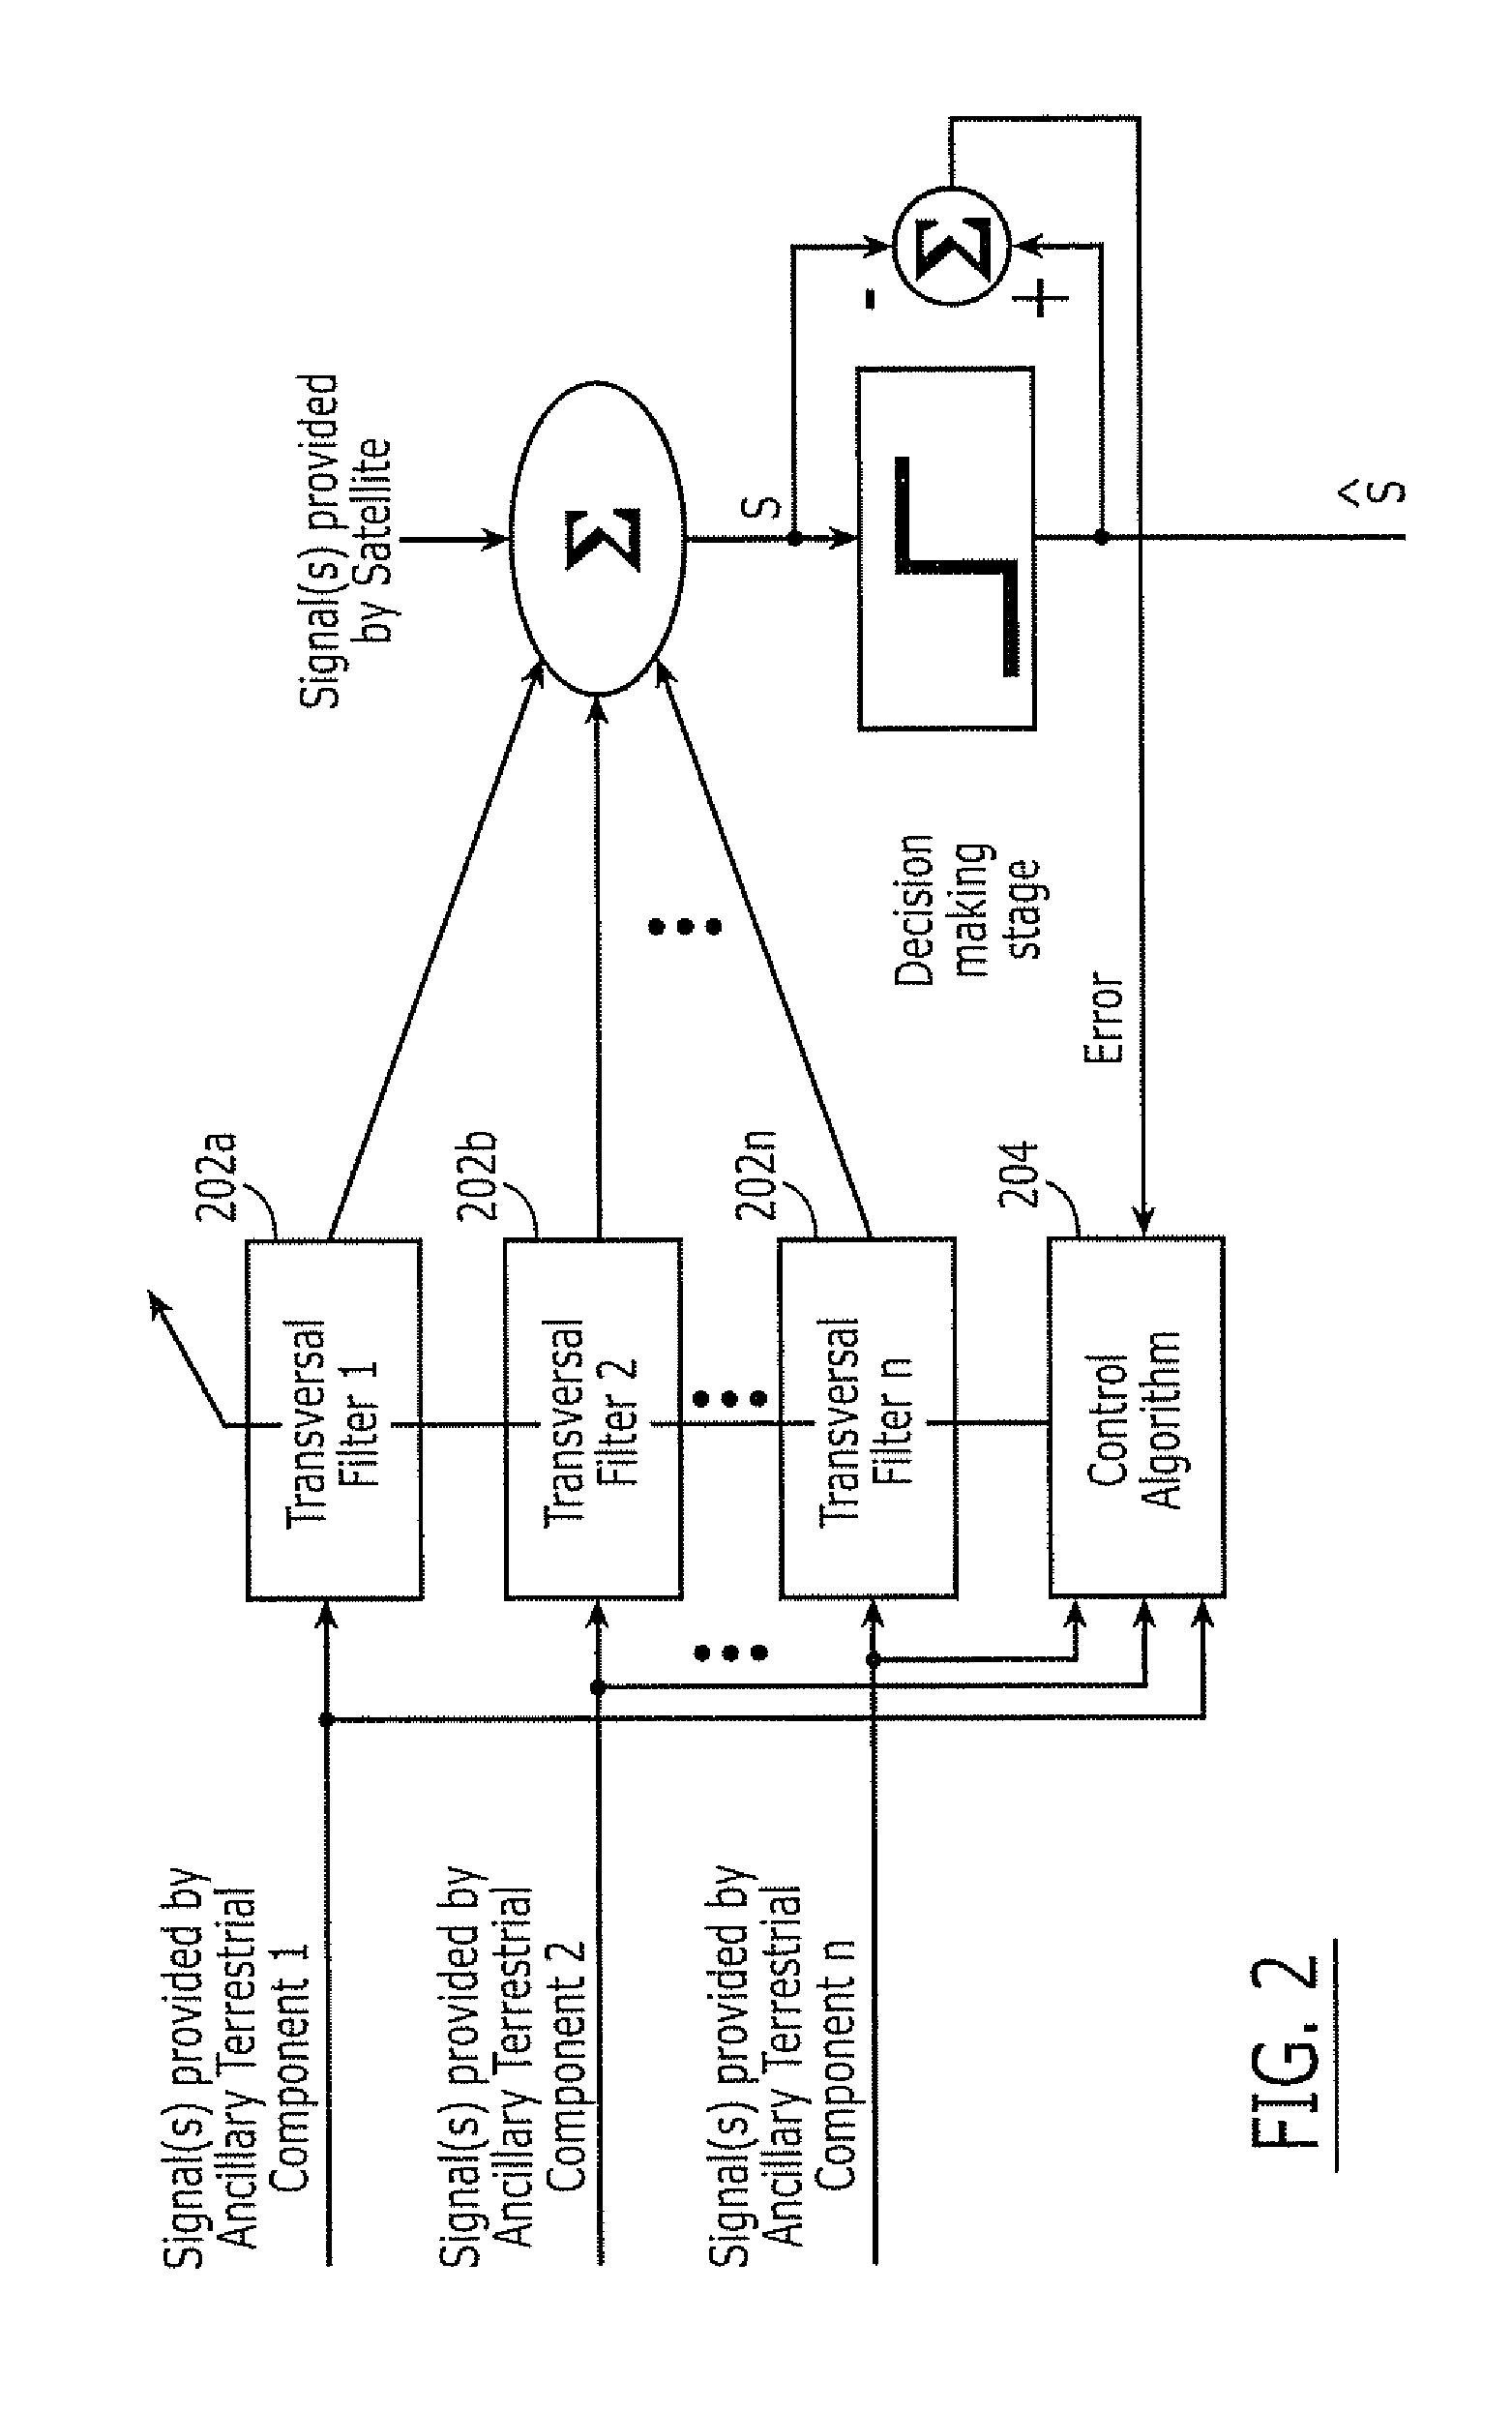 Additional aggregate radiated power control for multi-band/multi-mode satellite radiotelephone communications systems and methods